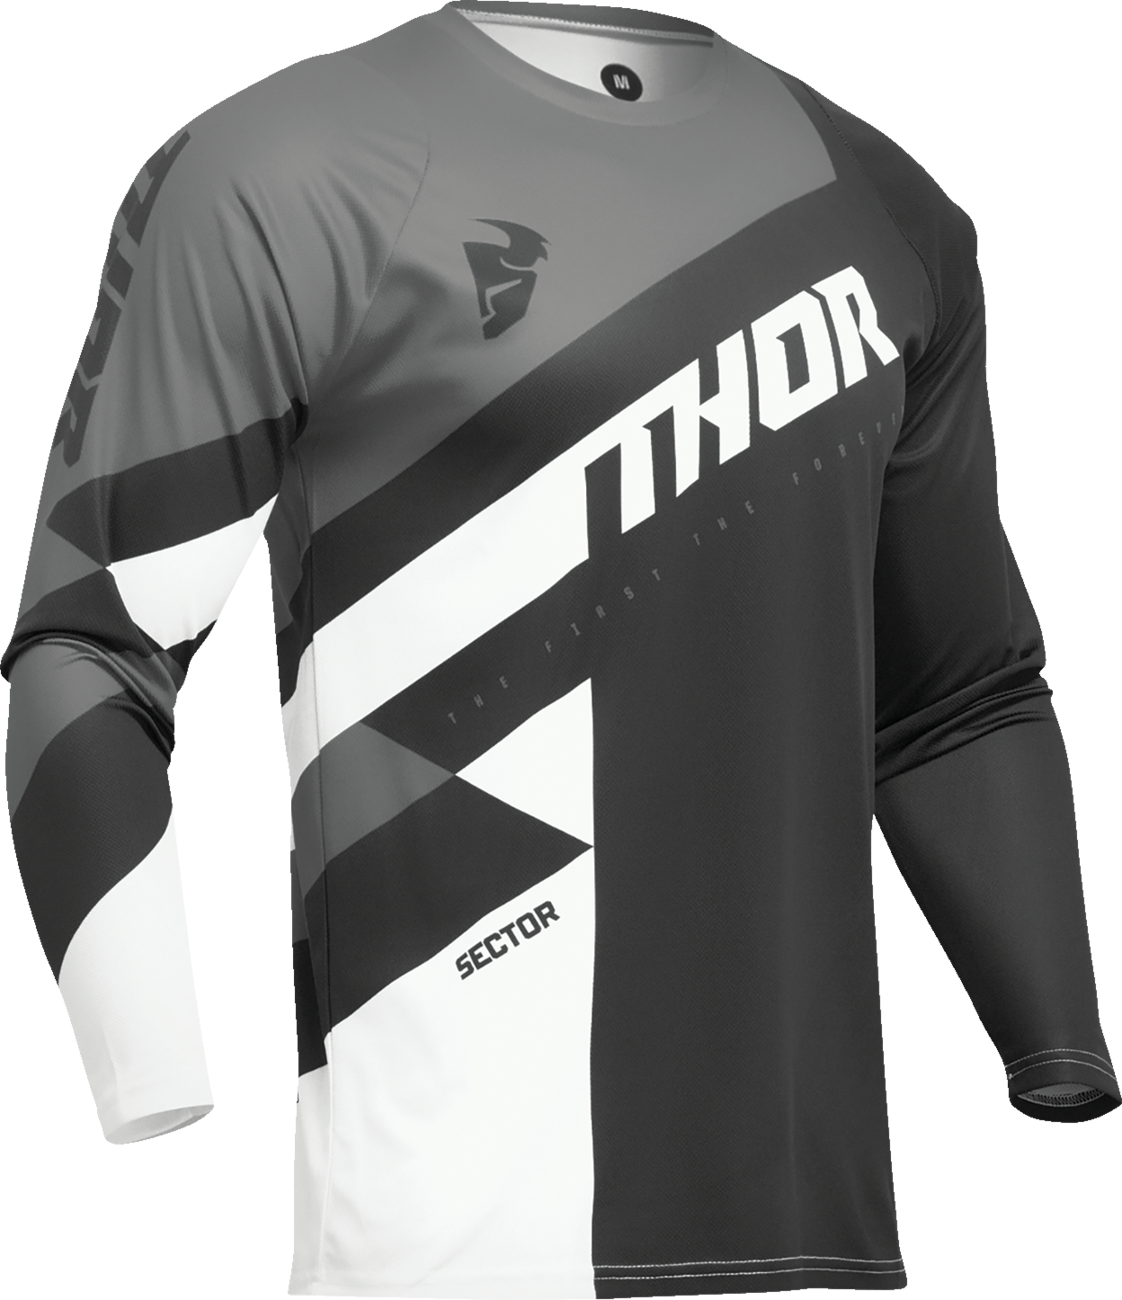 THOR Sector Checker Jersey - Black/Gray - Small 2910-7580